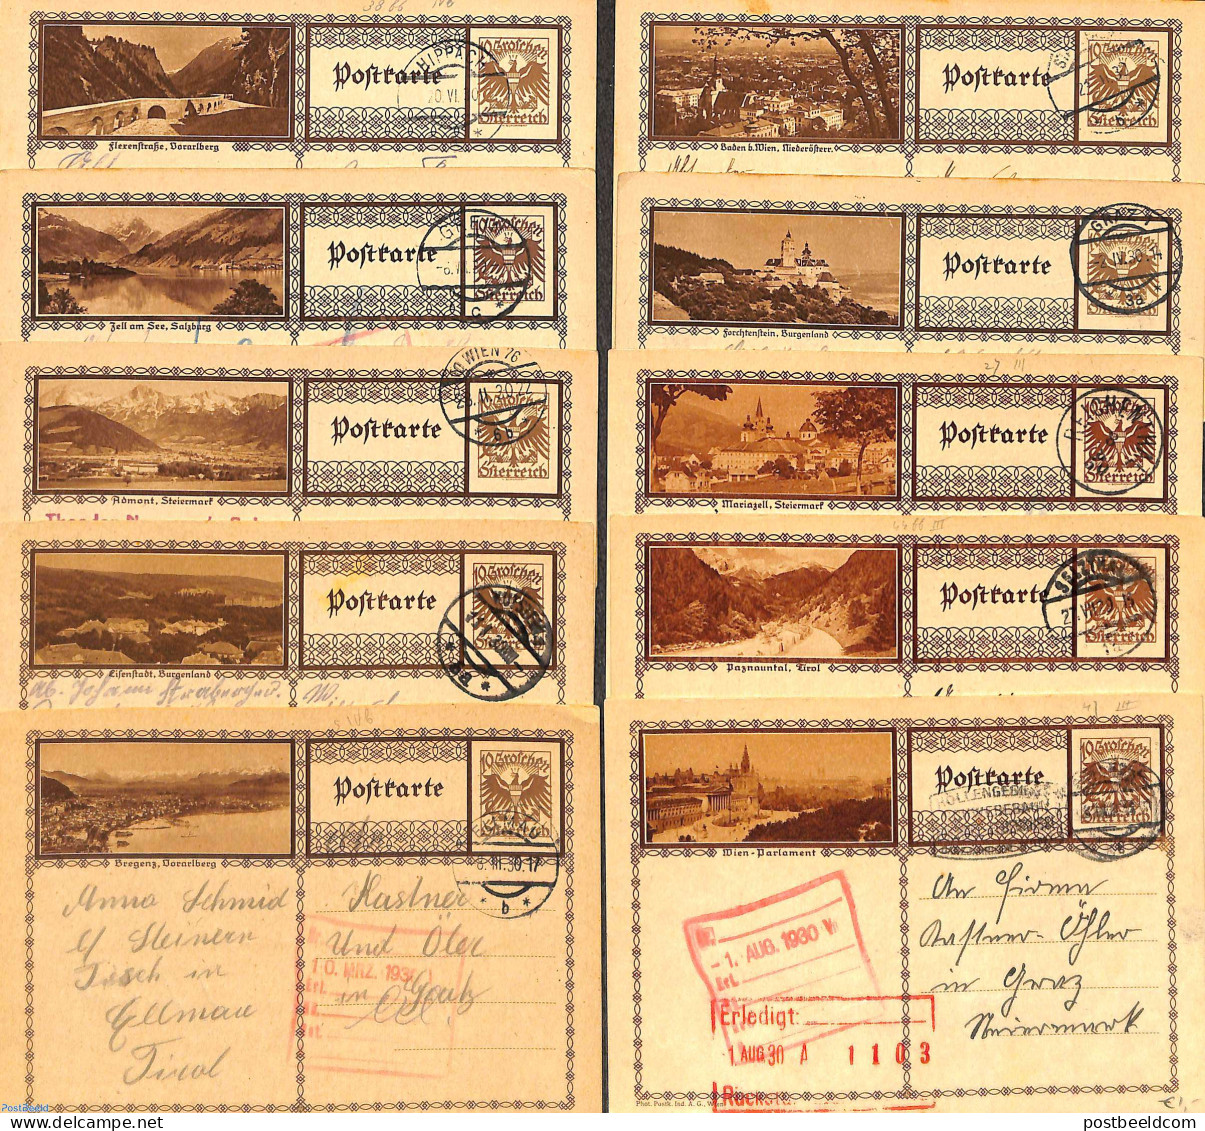 Austria 1930 Lot With 10 Used Illustrated Postcards, Used Postal Stationary - Covers & Documents